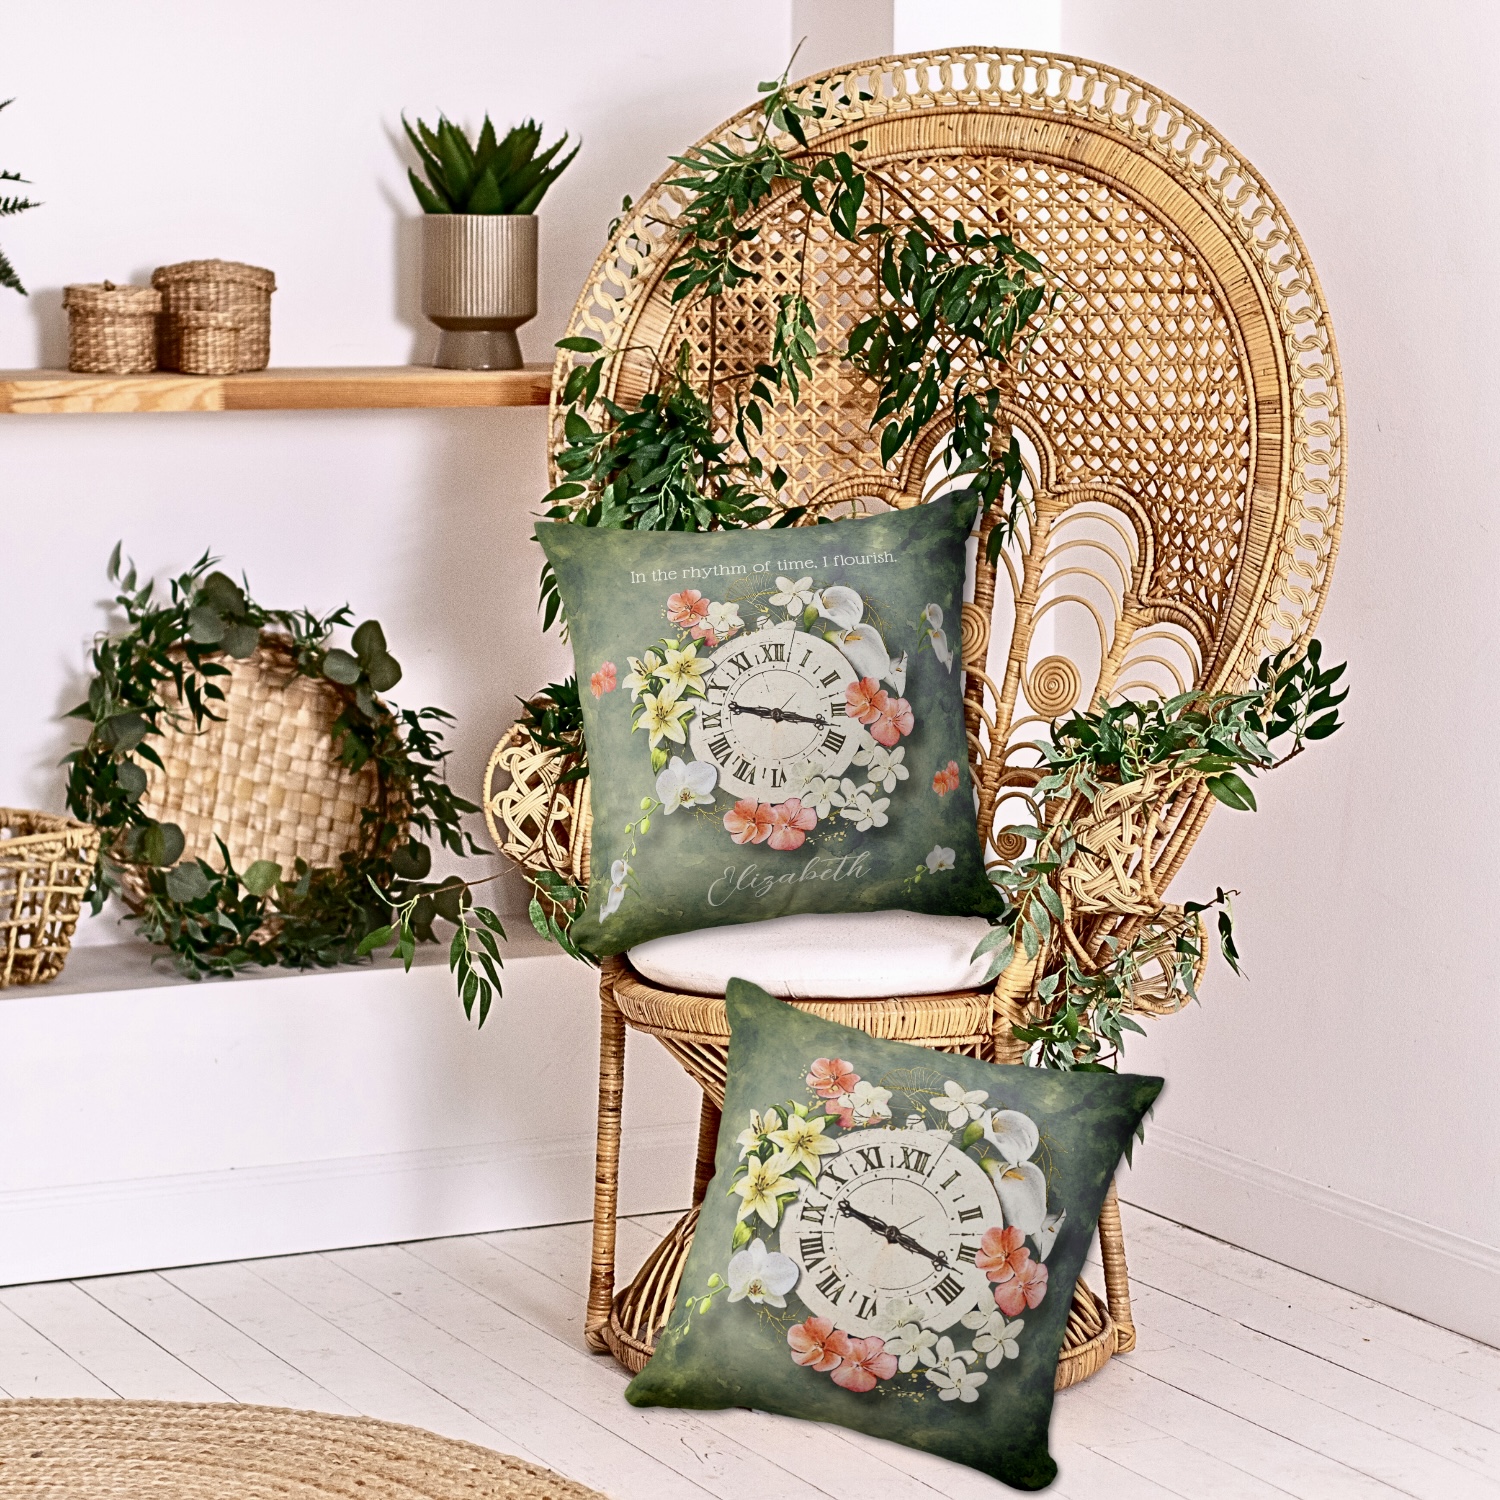 Two throw pillows with same vintage clock design with flowers, one pillow has also an inspirational message and space for a name.